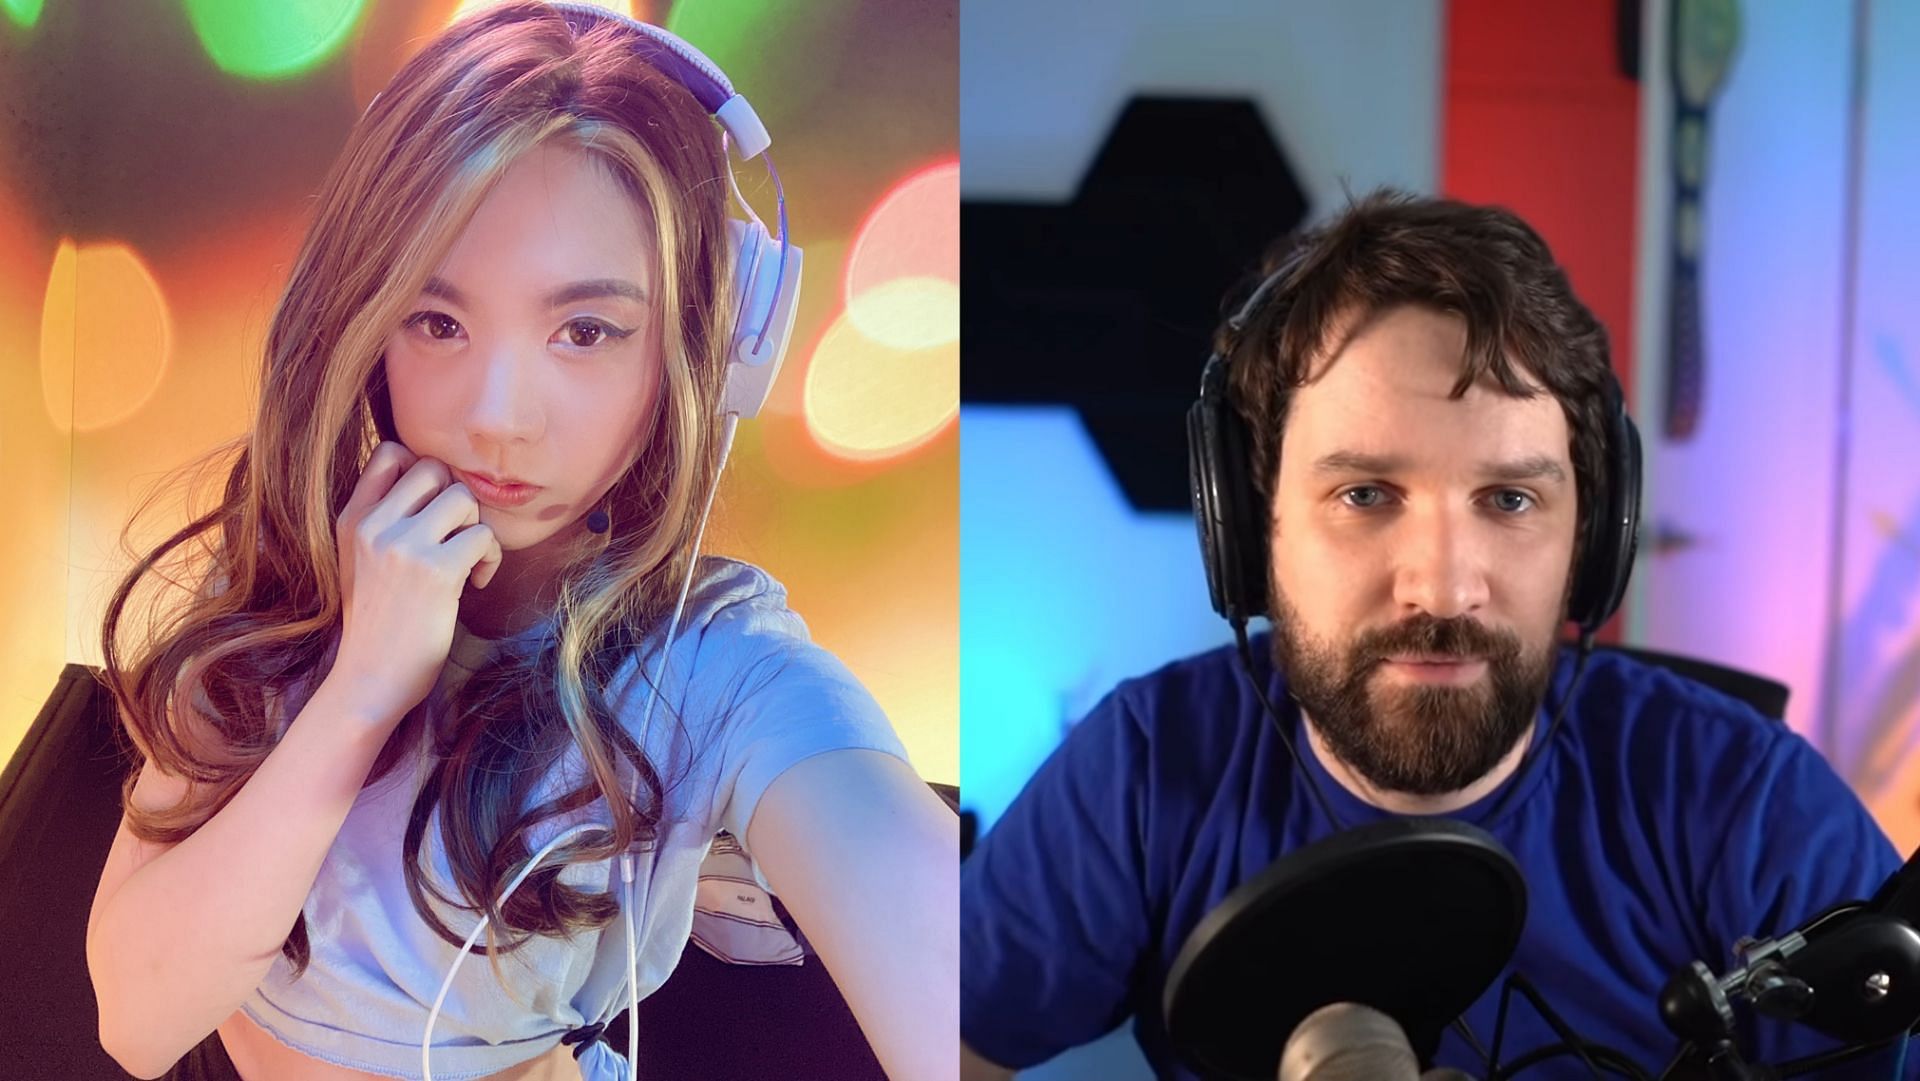 Destiny calls out Lilypichu as a Trump supporter, Lily responds on Reddit